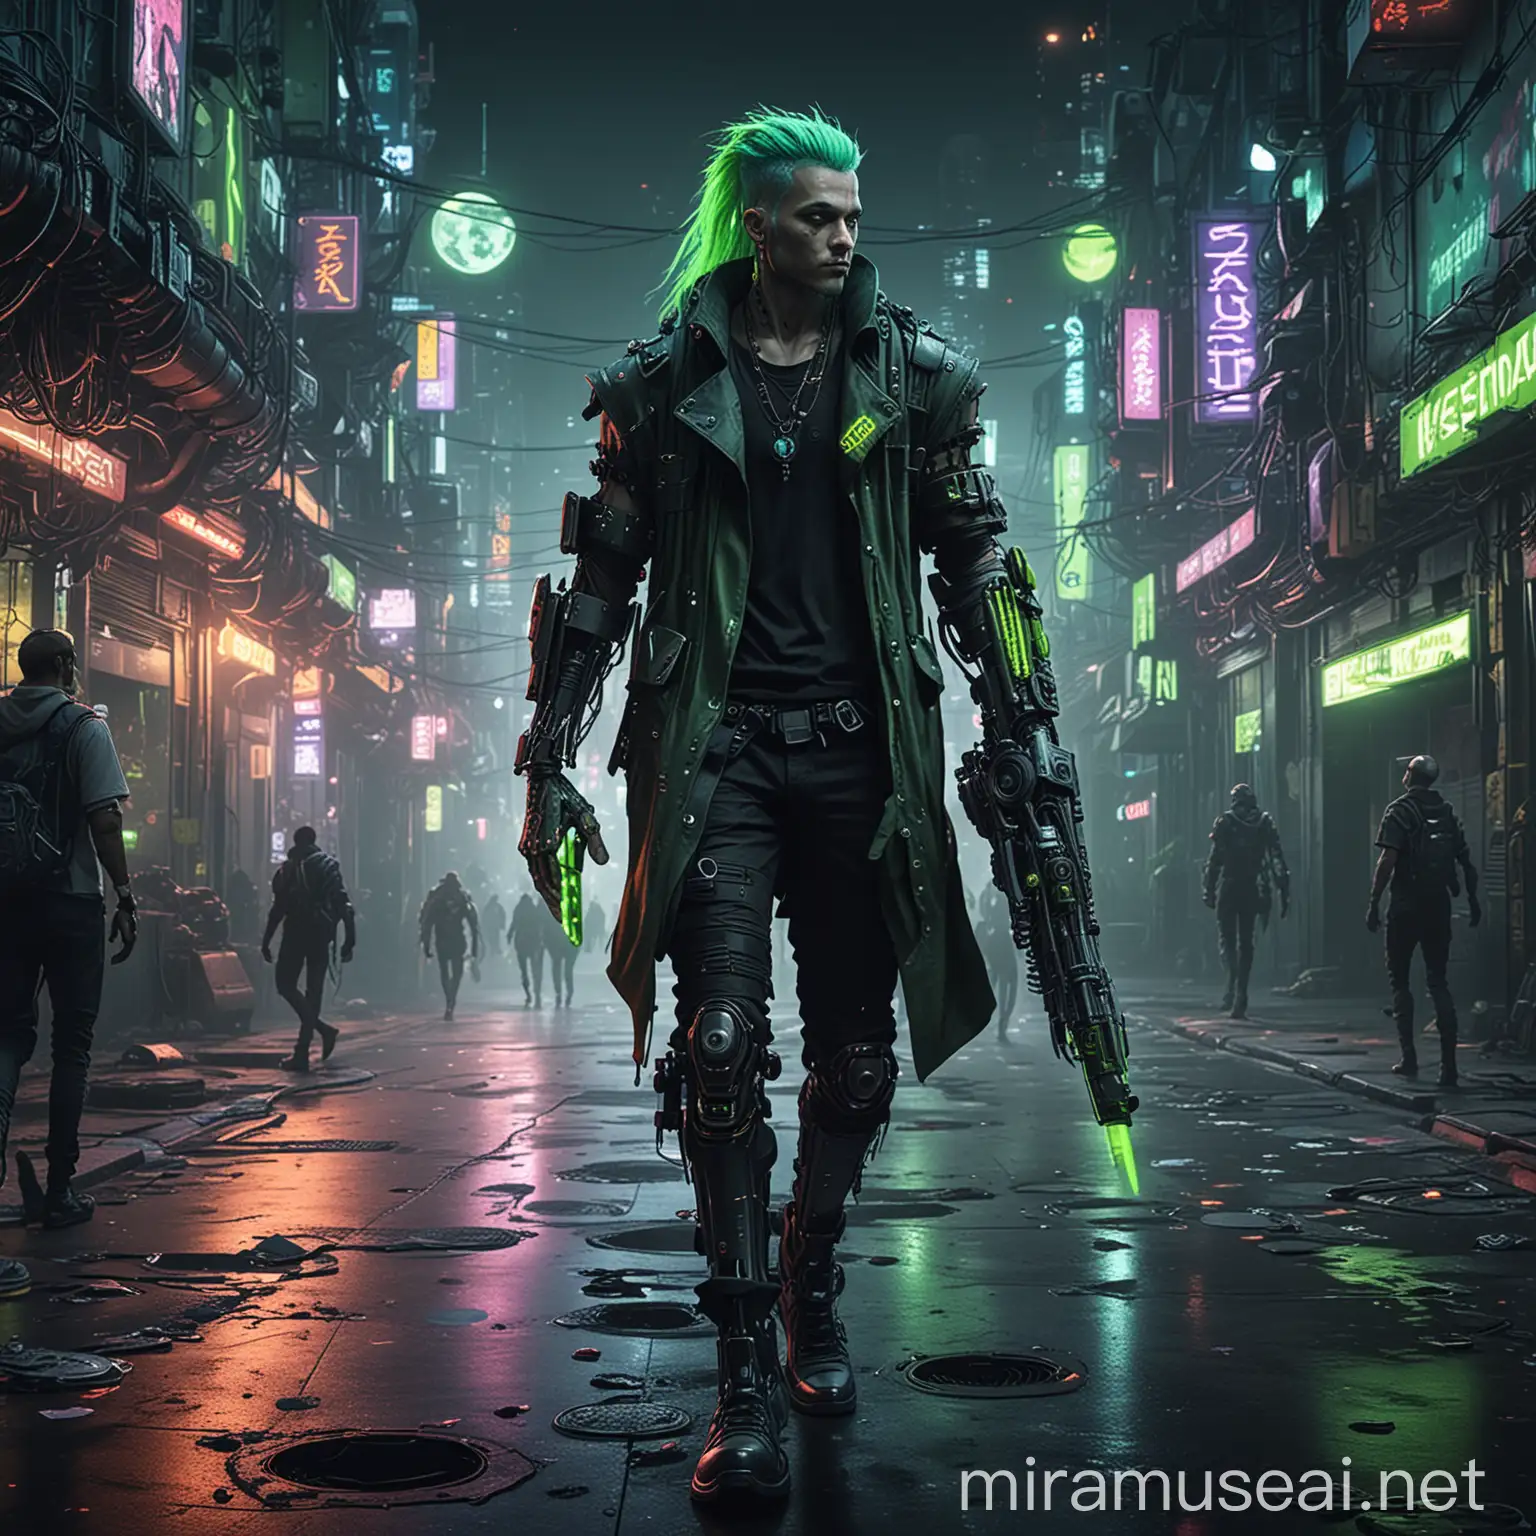 Neon Green Haired Man Walking Through Cyberpunk City Holding Planets